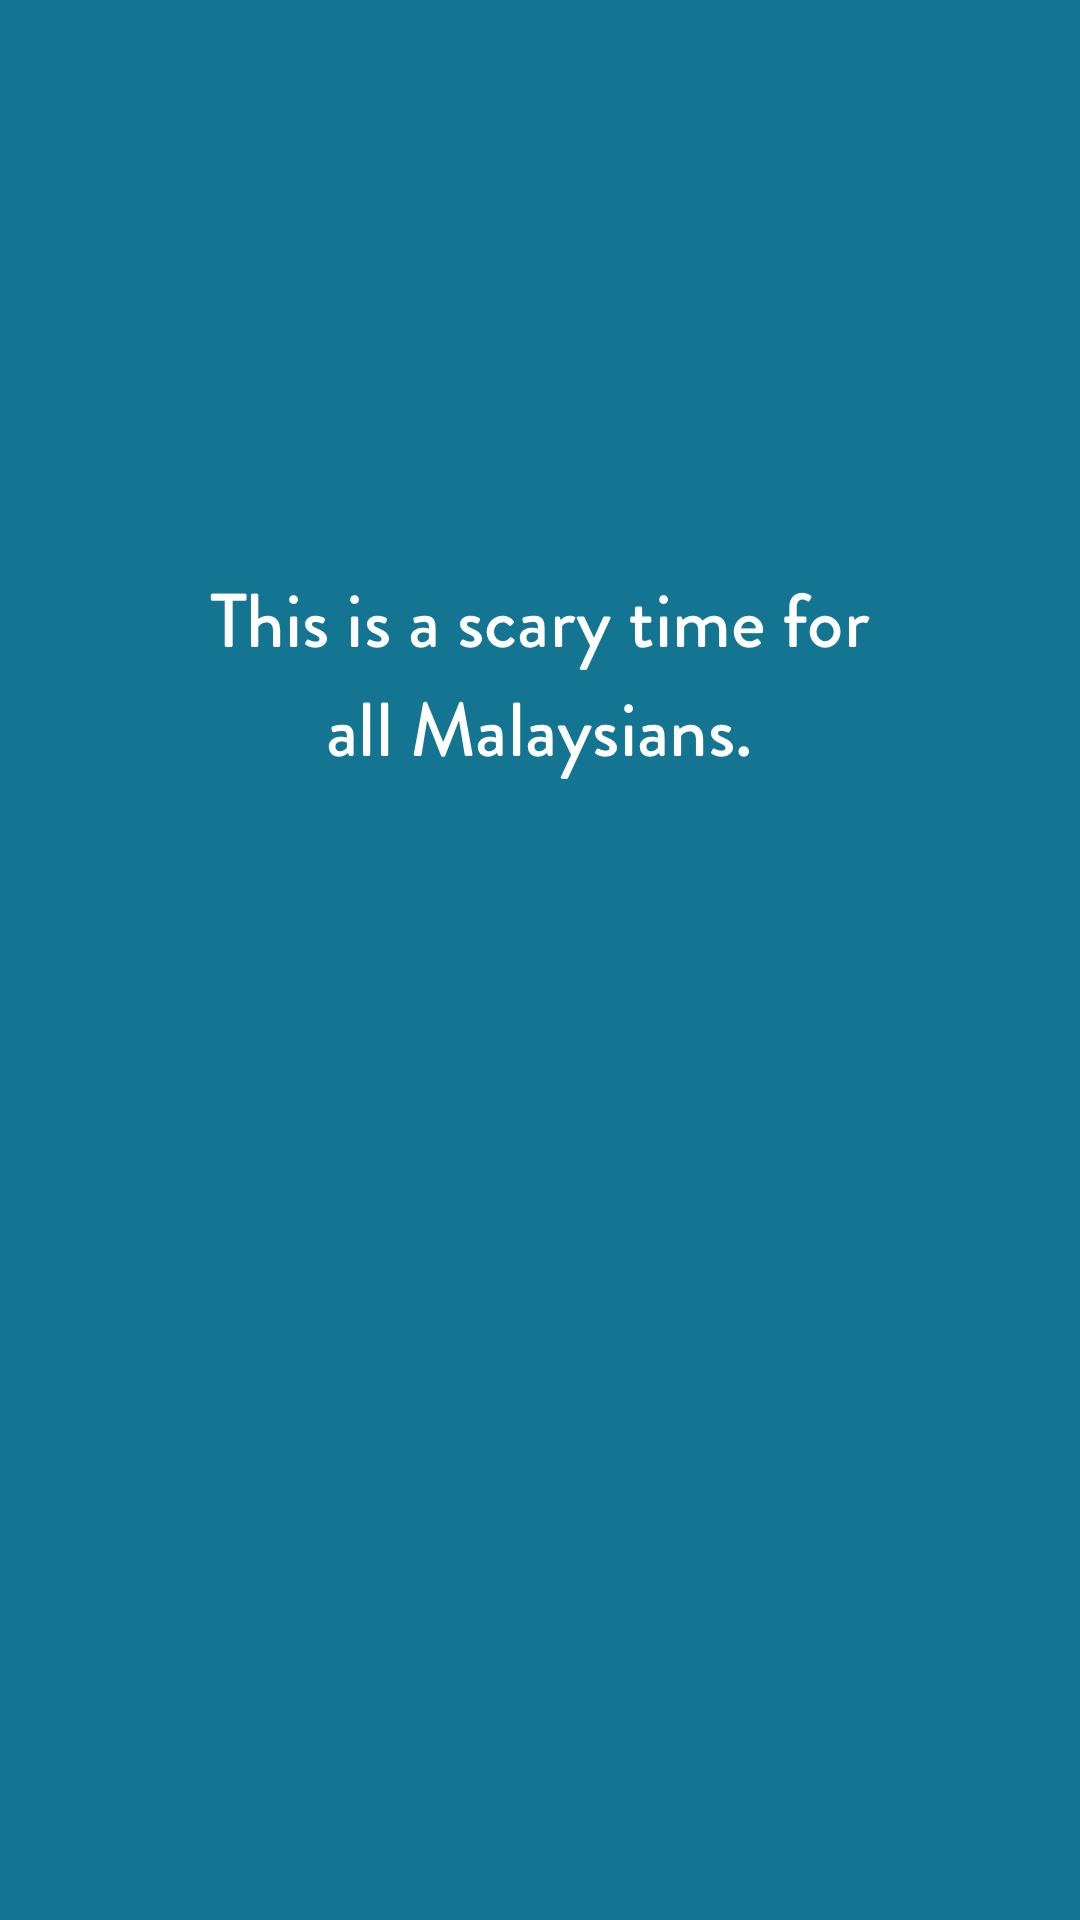 This is a scary time for all Malaysians